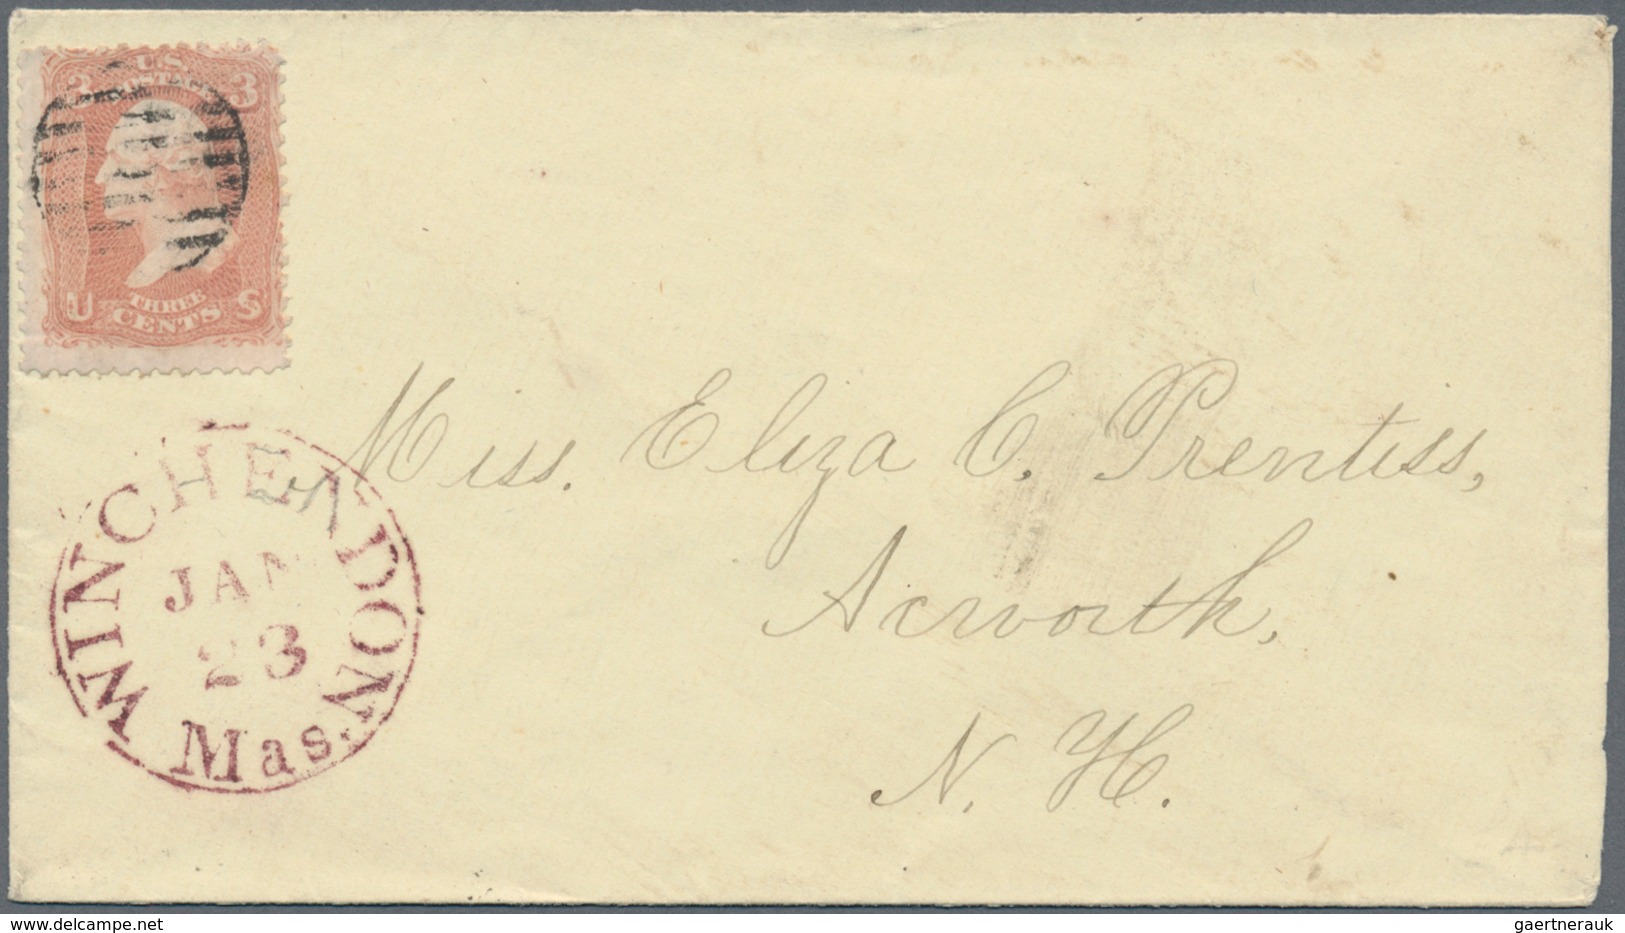 Vereinigte Staaten von Amerika: 1850/1950 (ca.), holding of more than 200 covers/cards/stationeries,